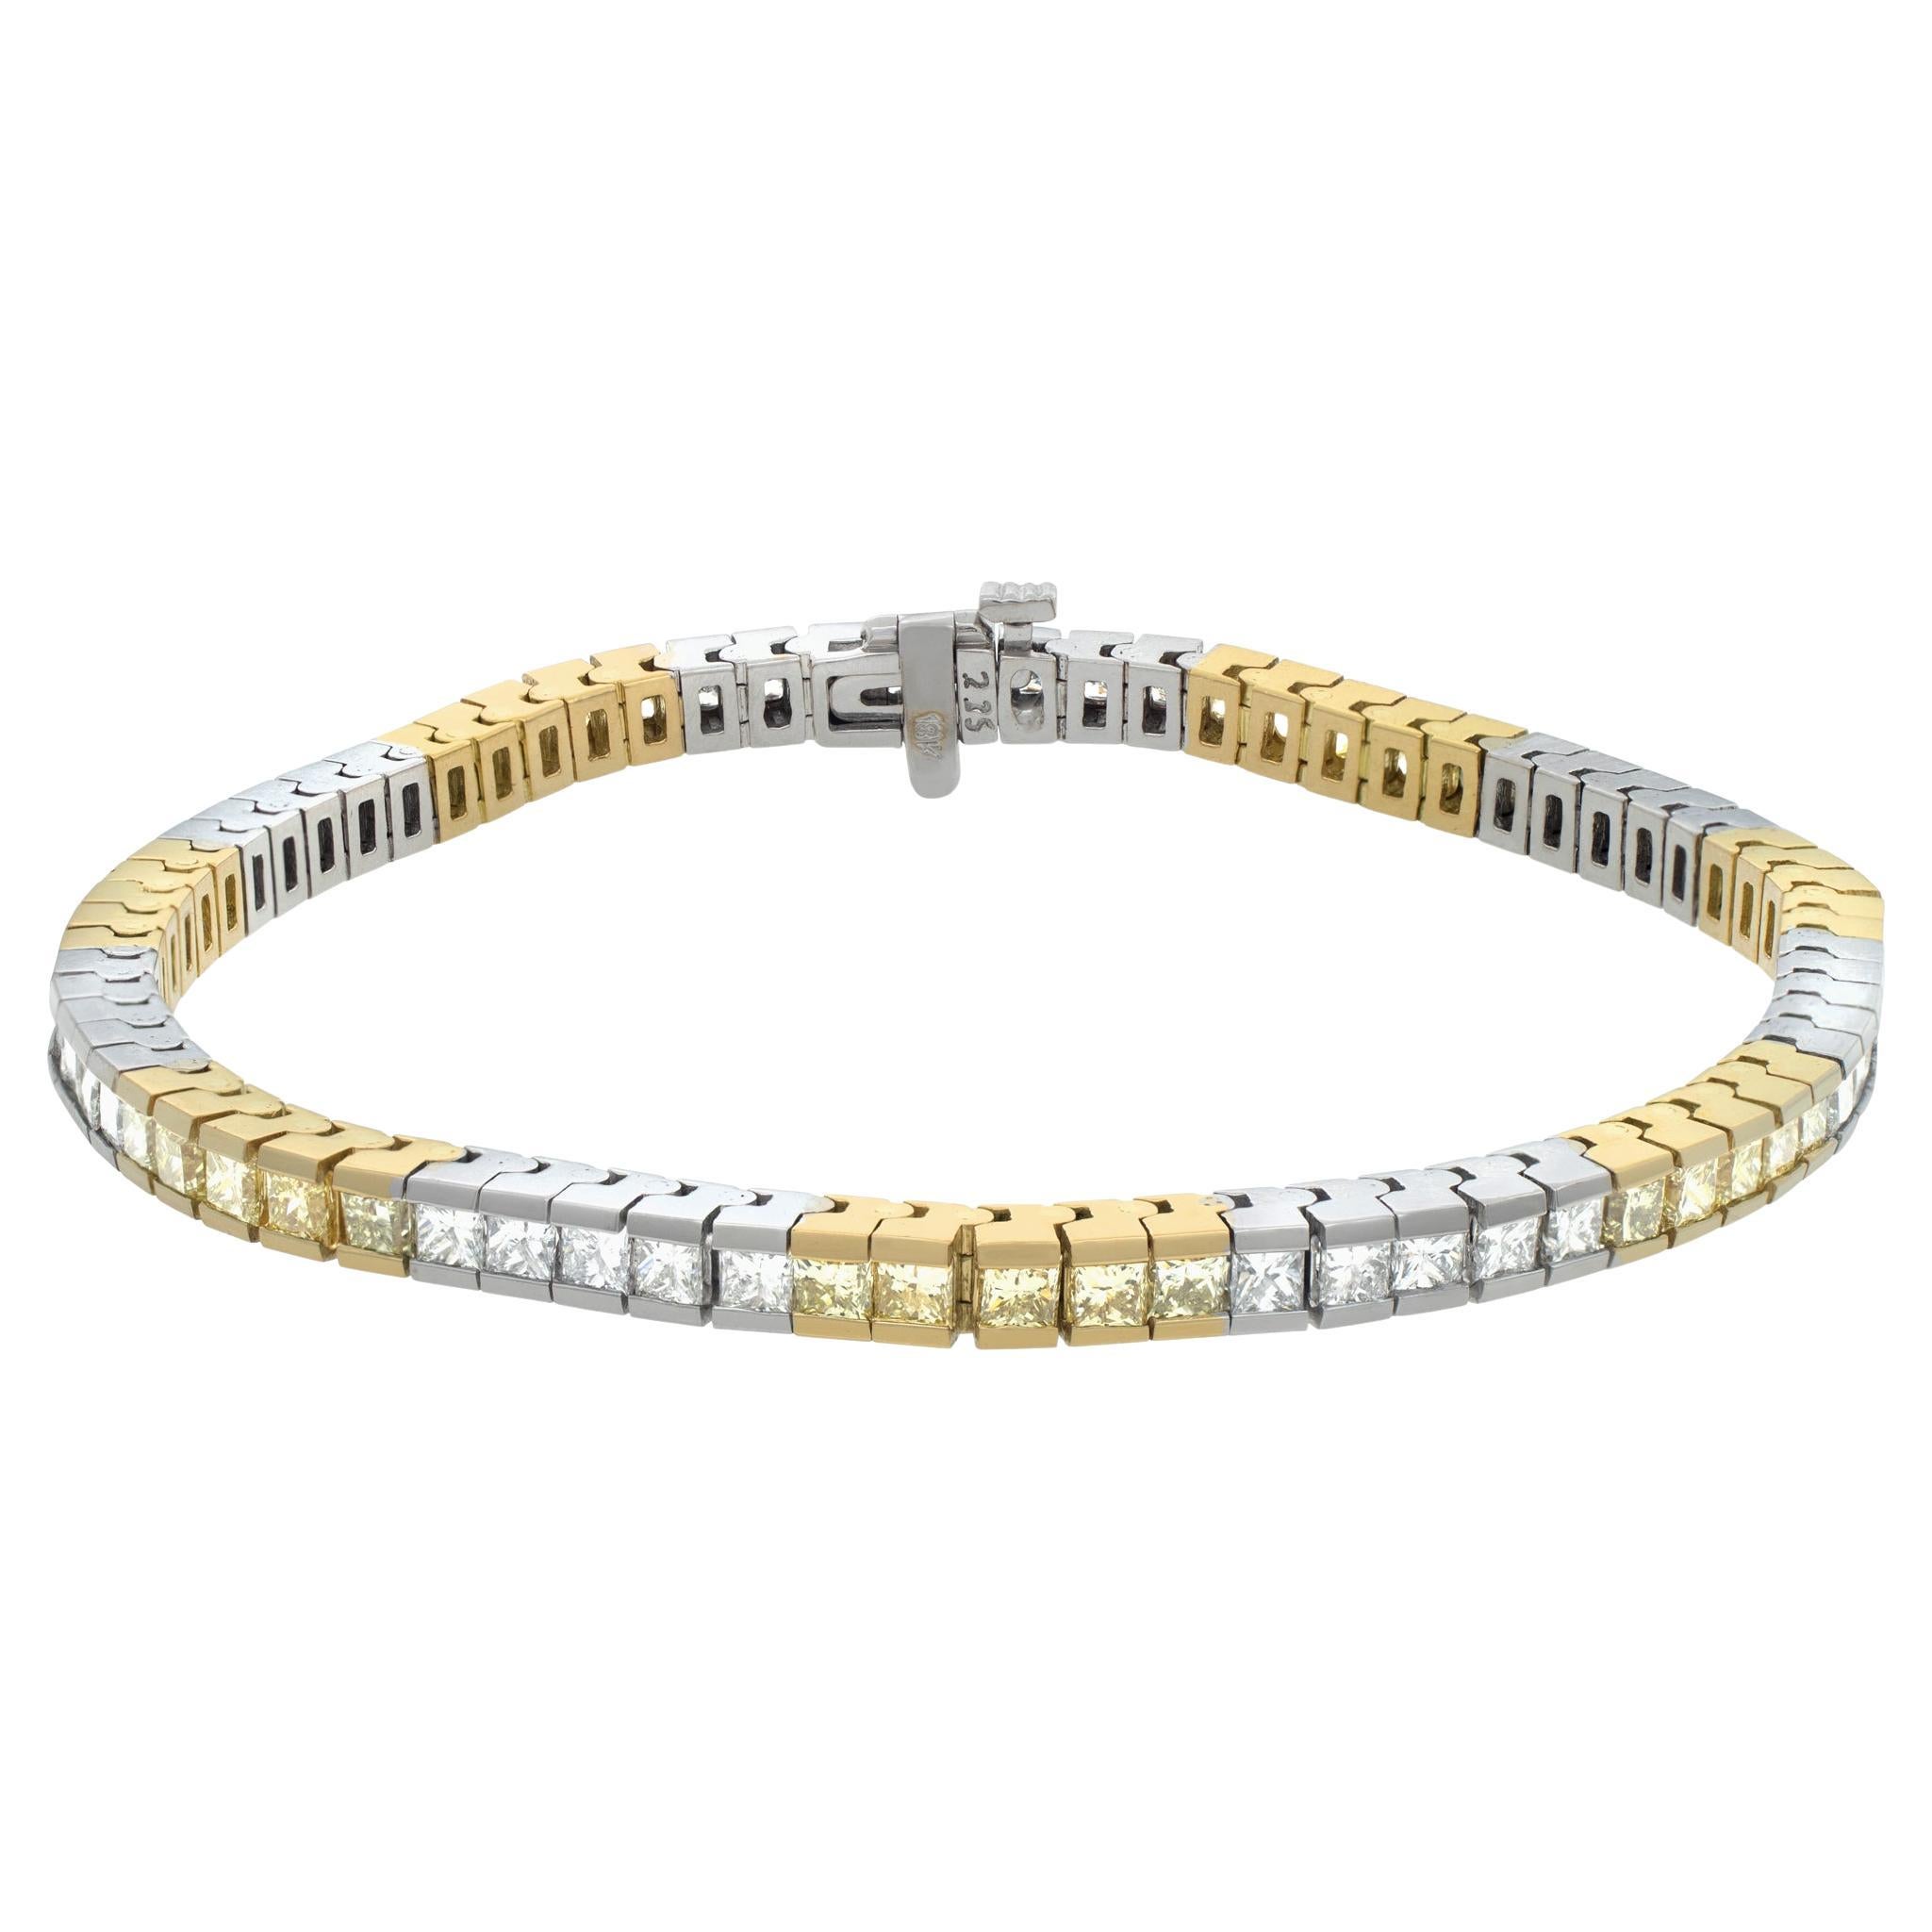 White and yelllow gold bracelet with white and yellow diamonds.